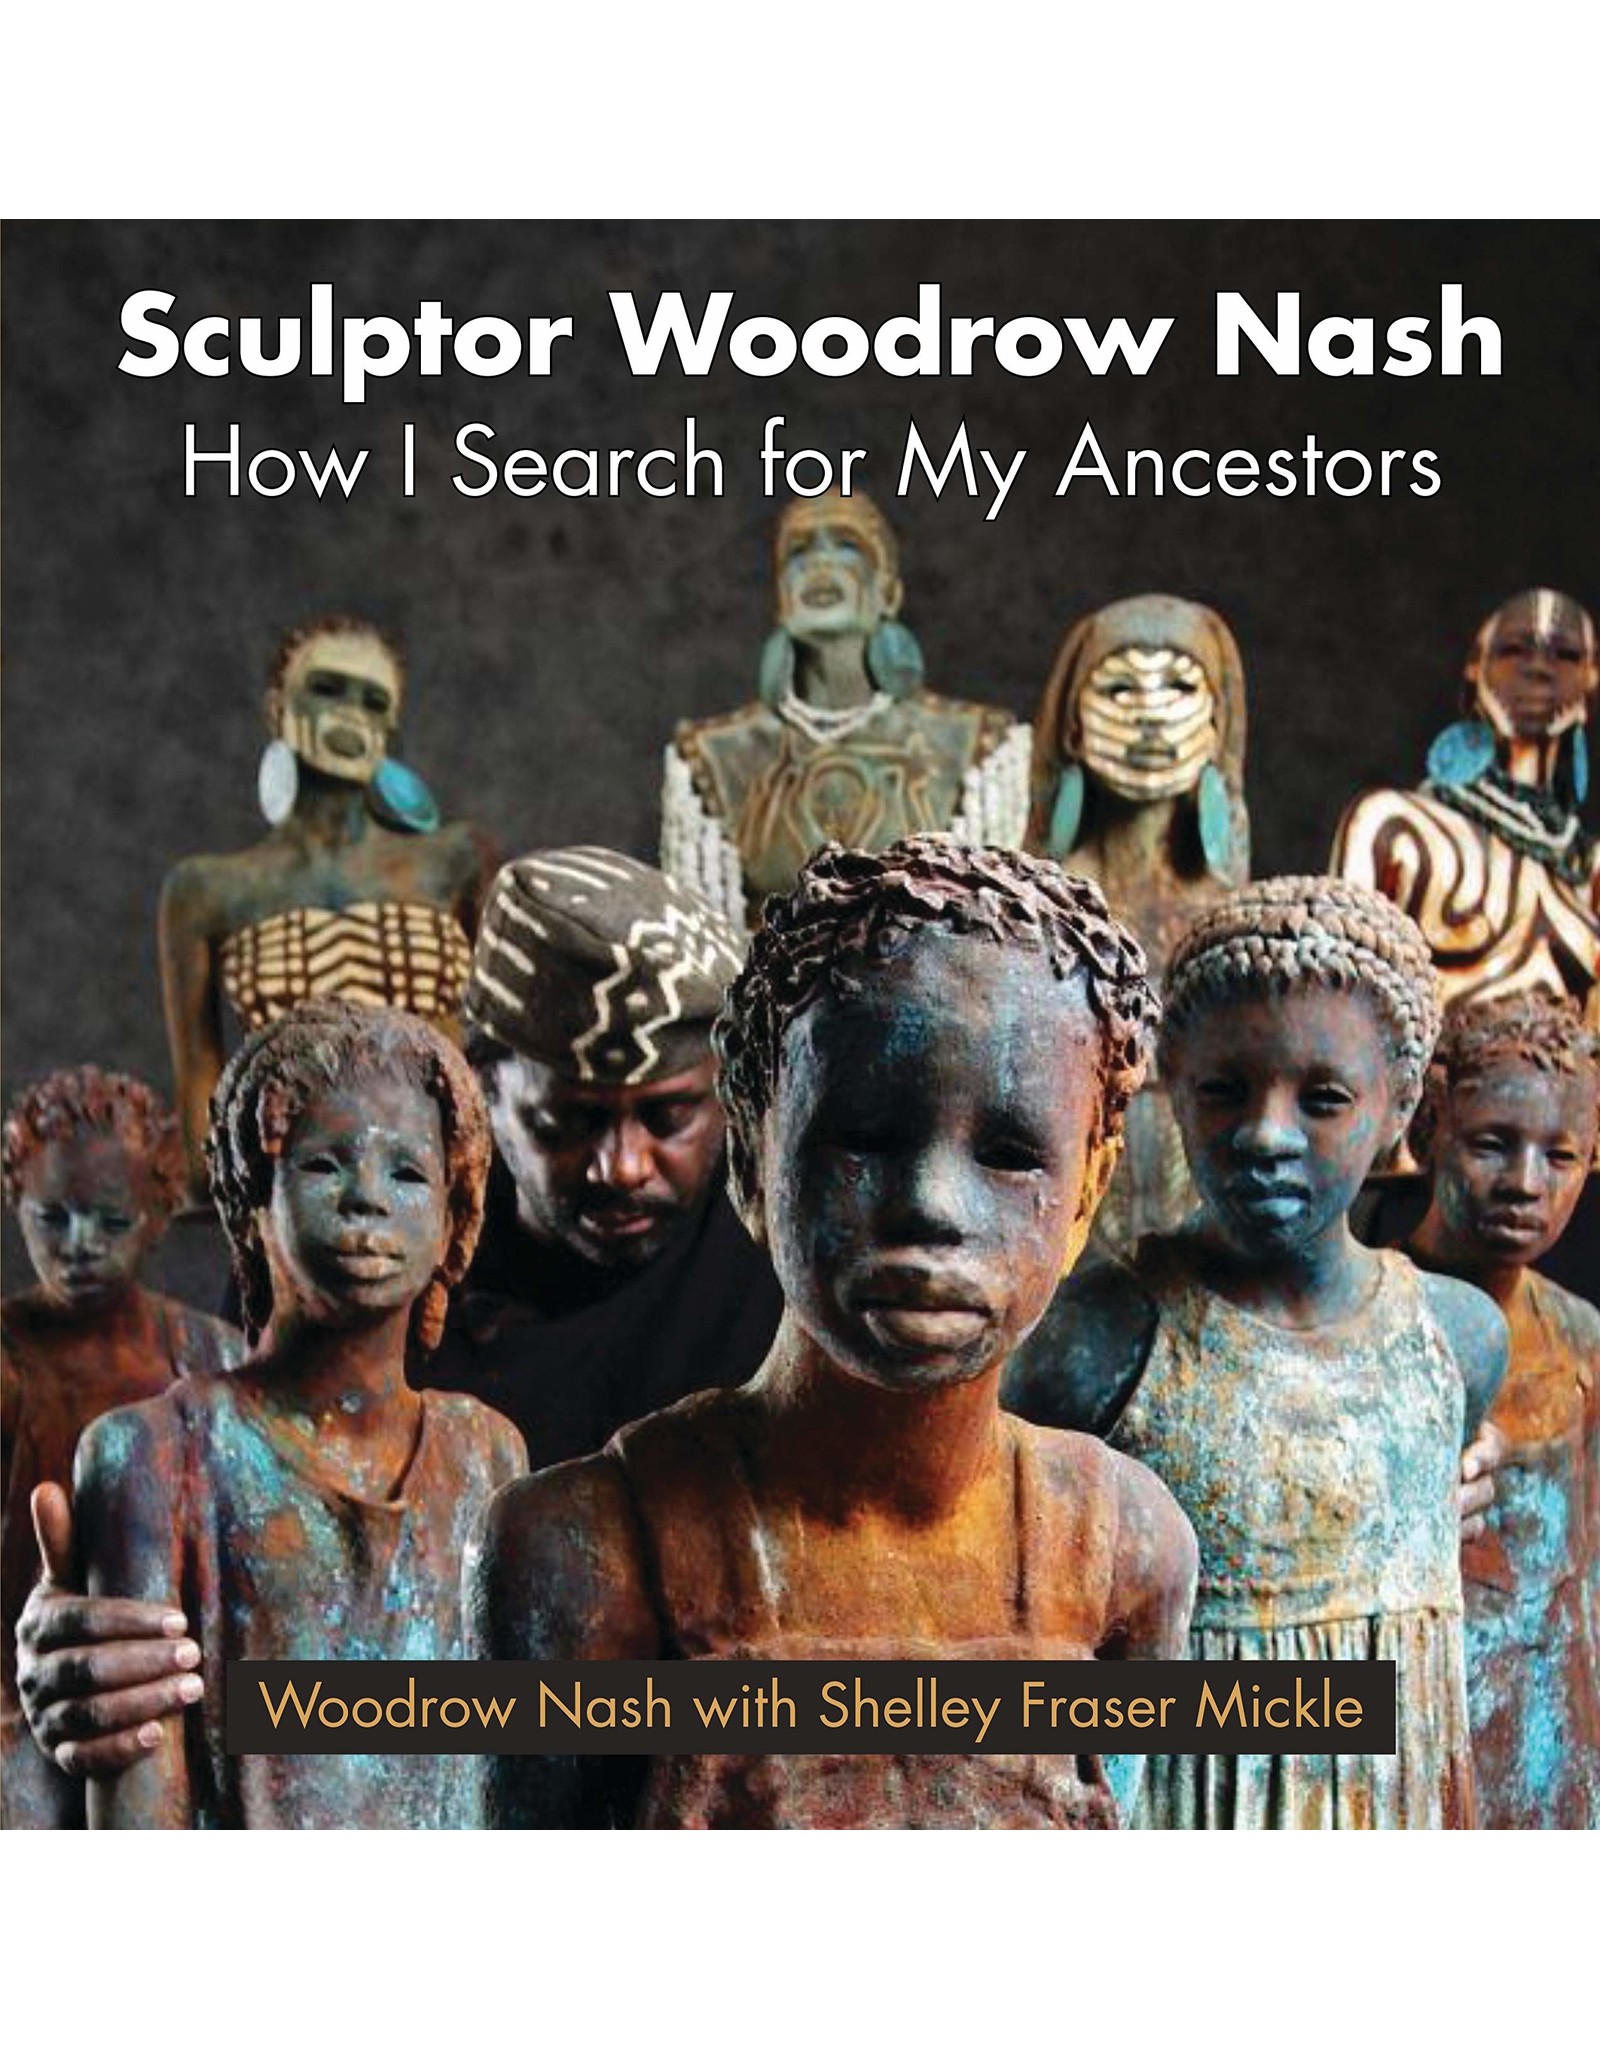 Sculptor Woodrow Nash: How I Search for My Ancestors